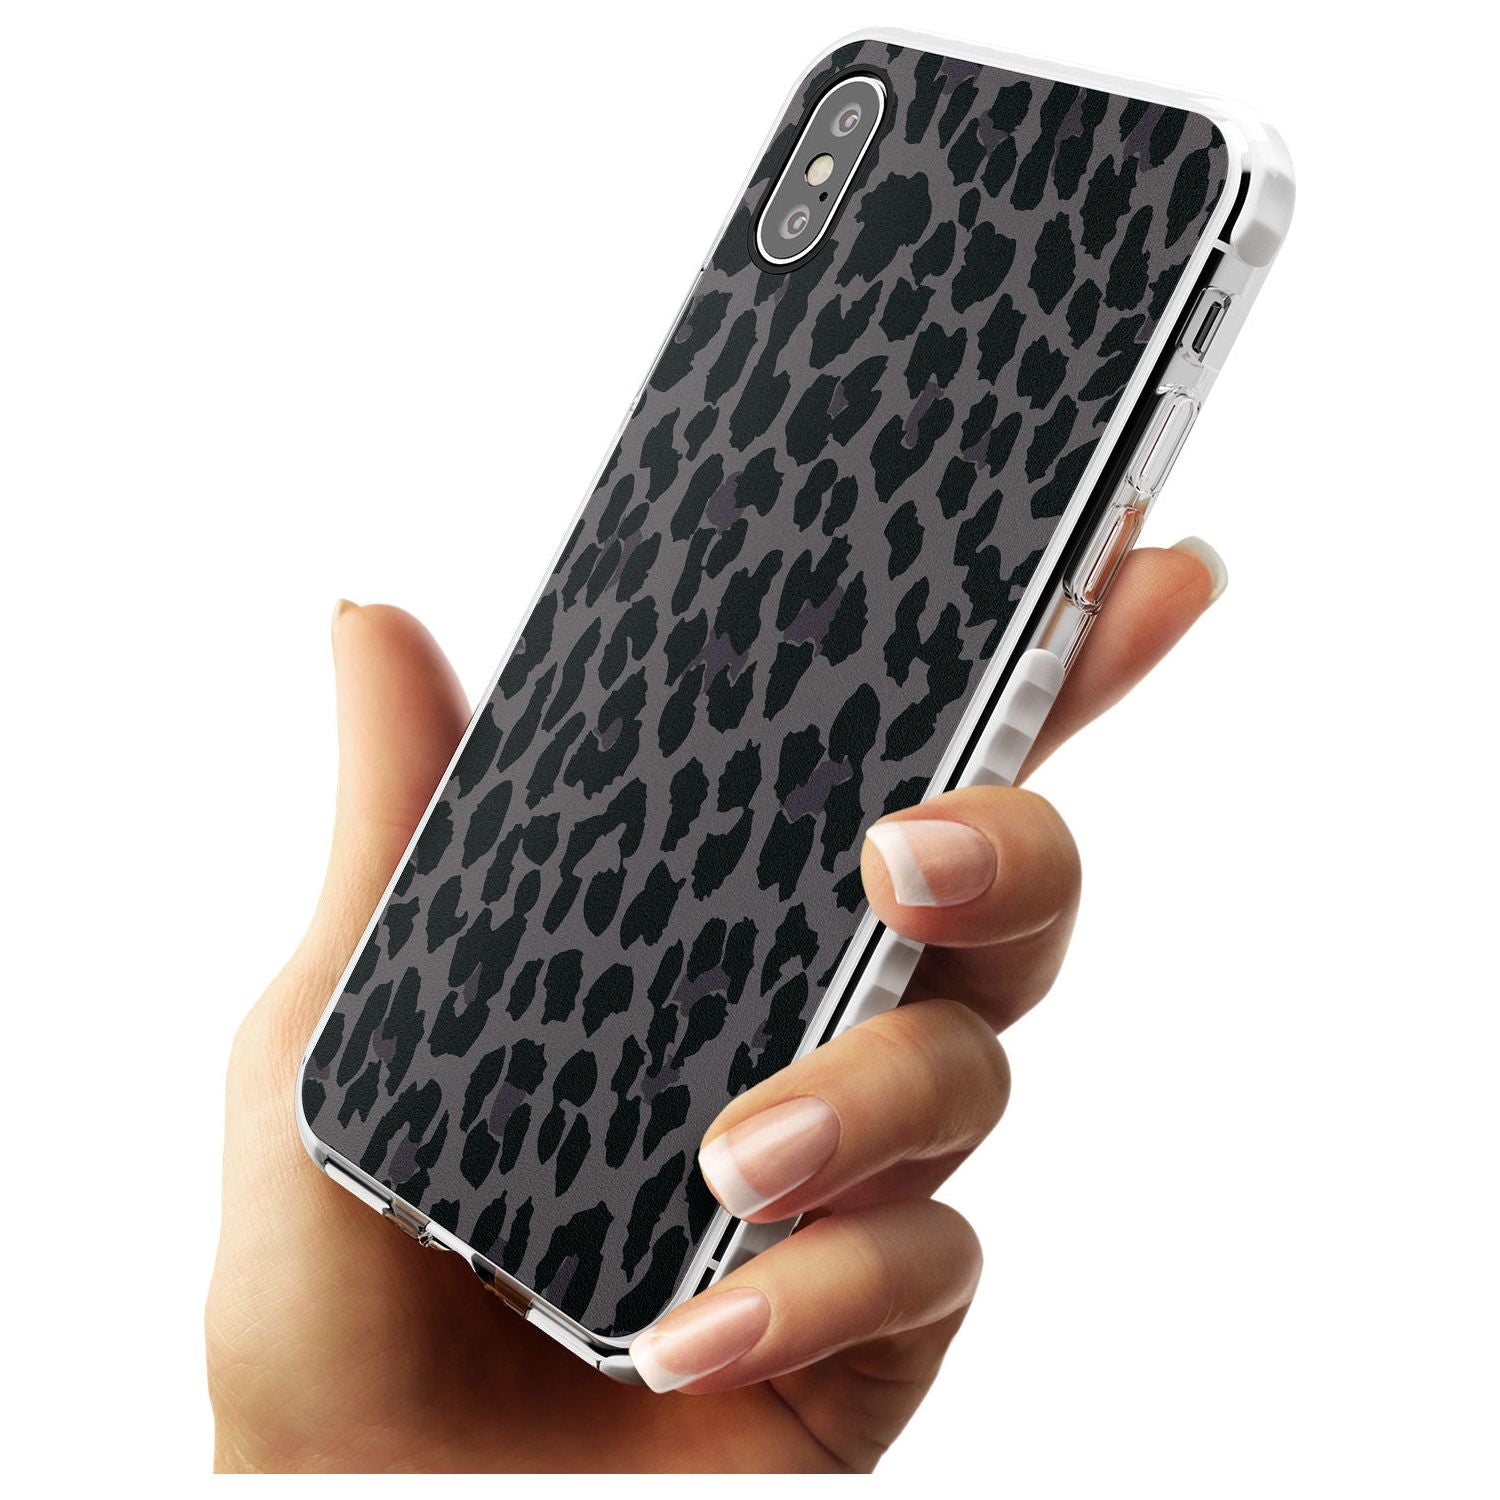 Dark Animal Print Pattern Large Leopard Impact Phone Case for iPhone X XS Max XR